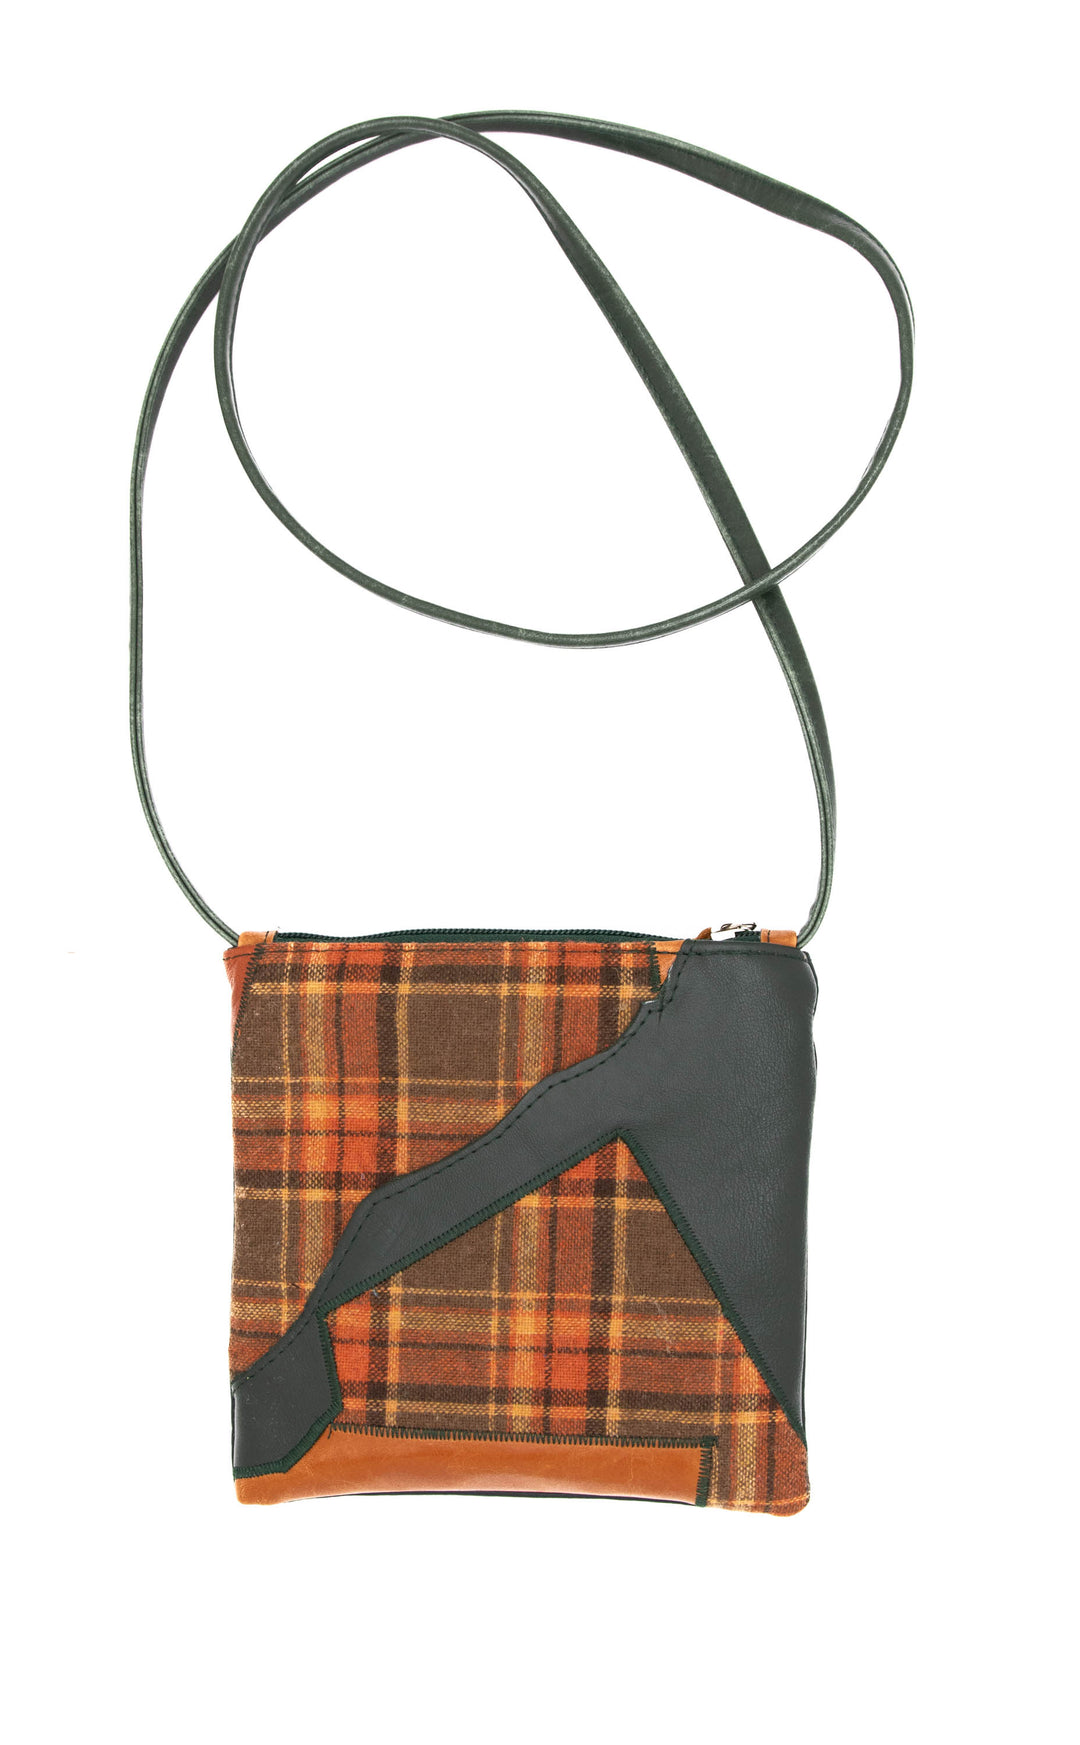 Cha Cha Small Crossbody Bag - Plaid and Green Patchwork 1 - One of a Kind